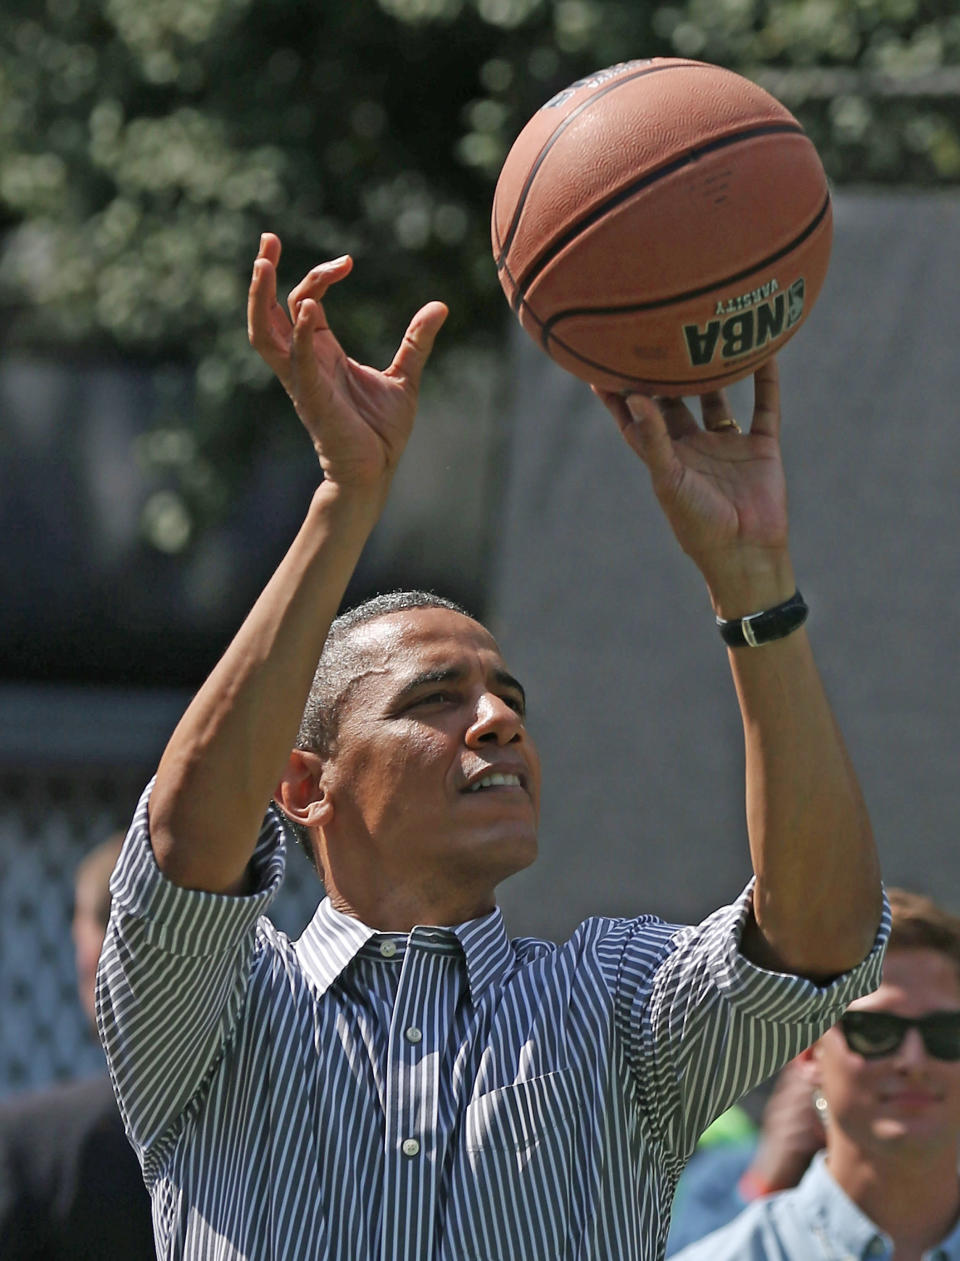 U.S. President Barack Obama plays basketball during the annual Easter Egg Roll on the White House tennis court April 1, 2013 in Washington, DC. Thousands of people are expected to attend the 134-year-old tradition of rolling colored eggs down the White House lawn that was started by President Rutherford B. Hayes in 1878.